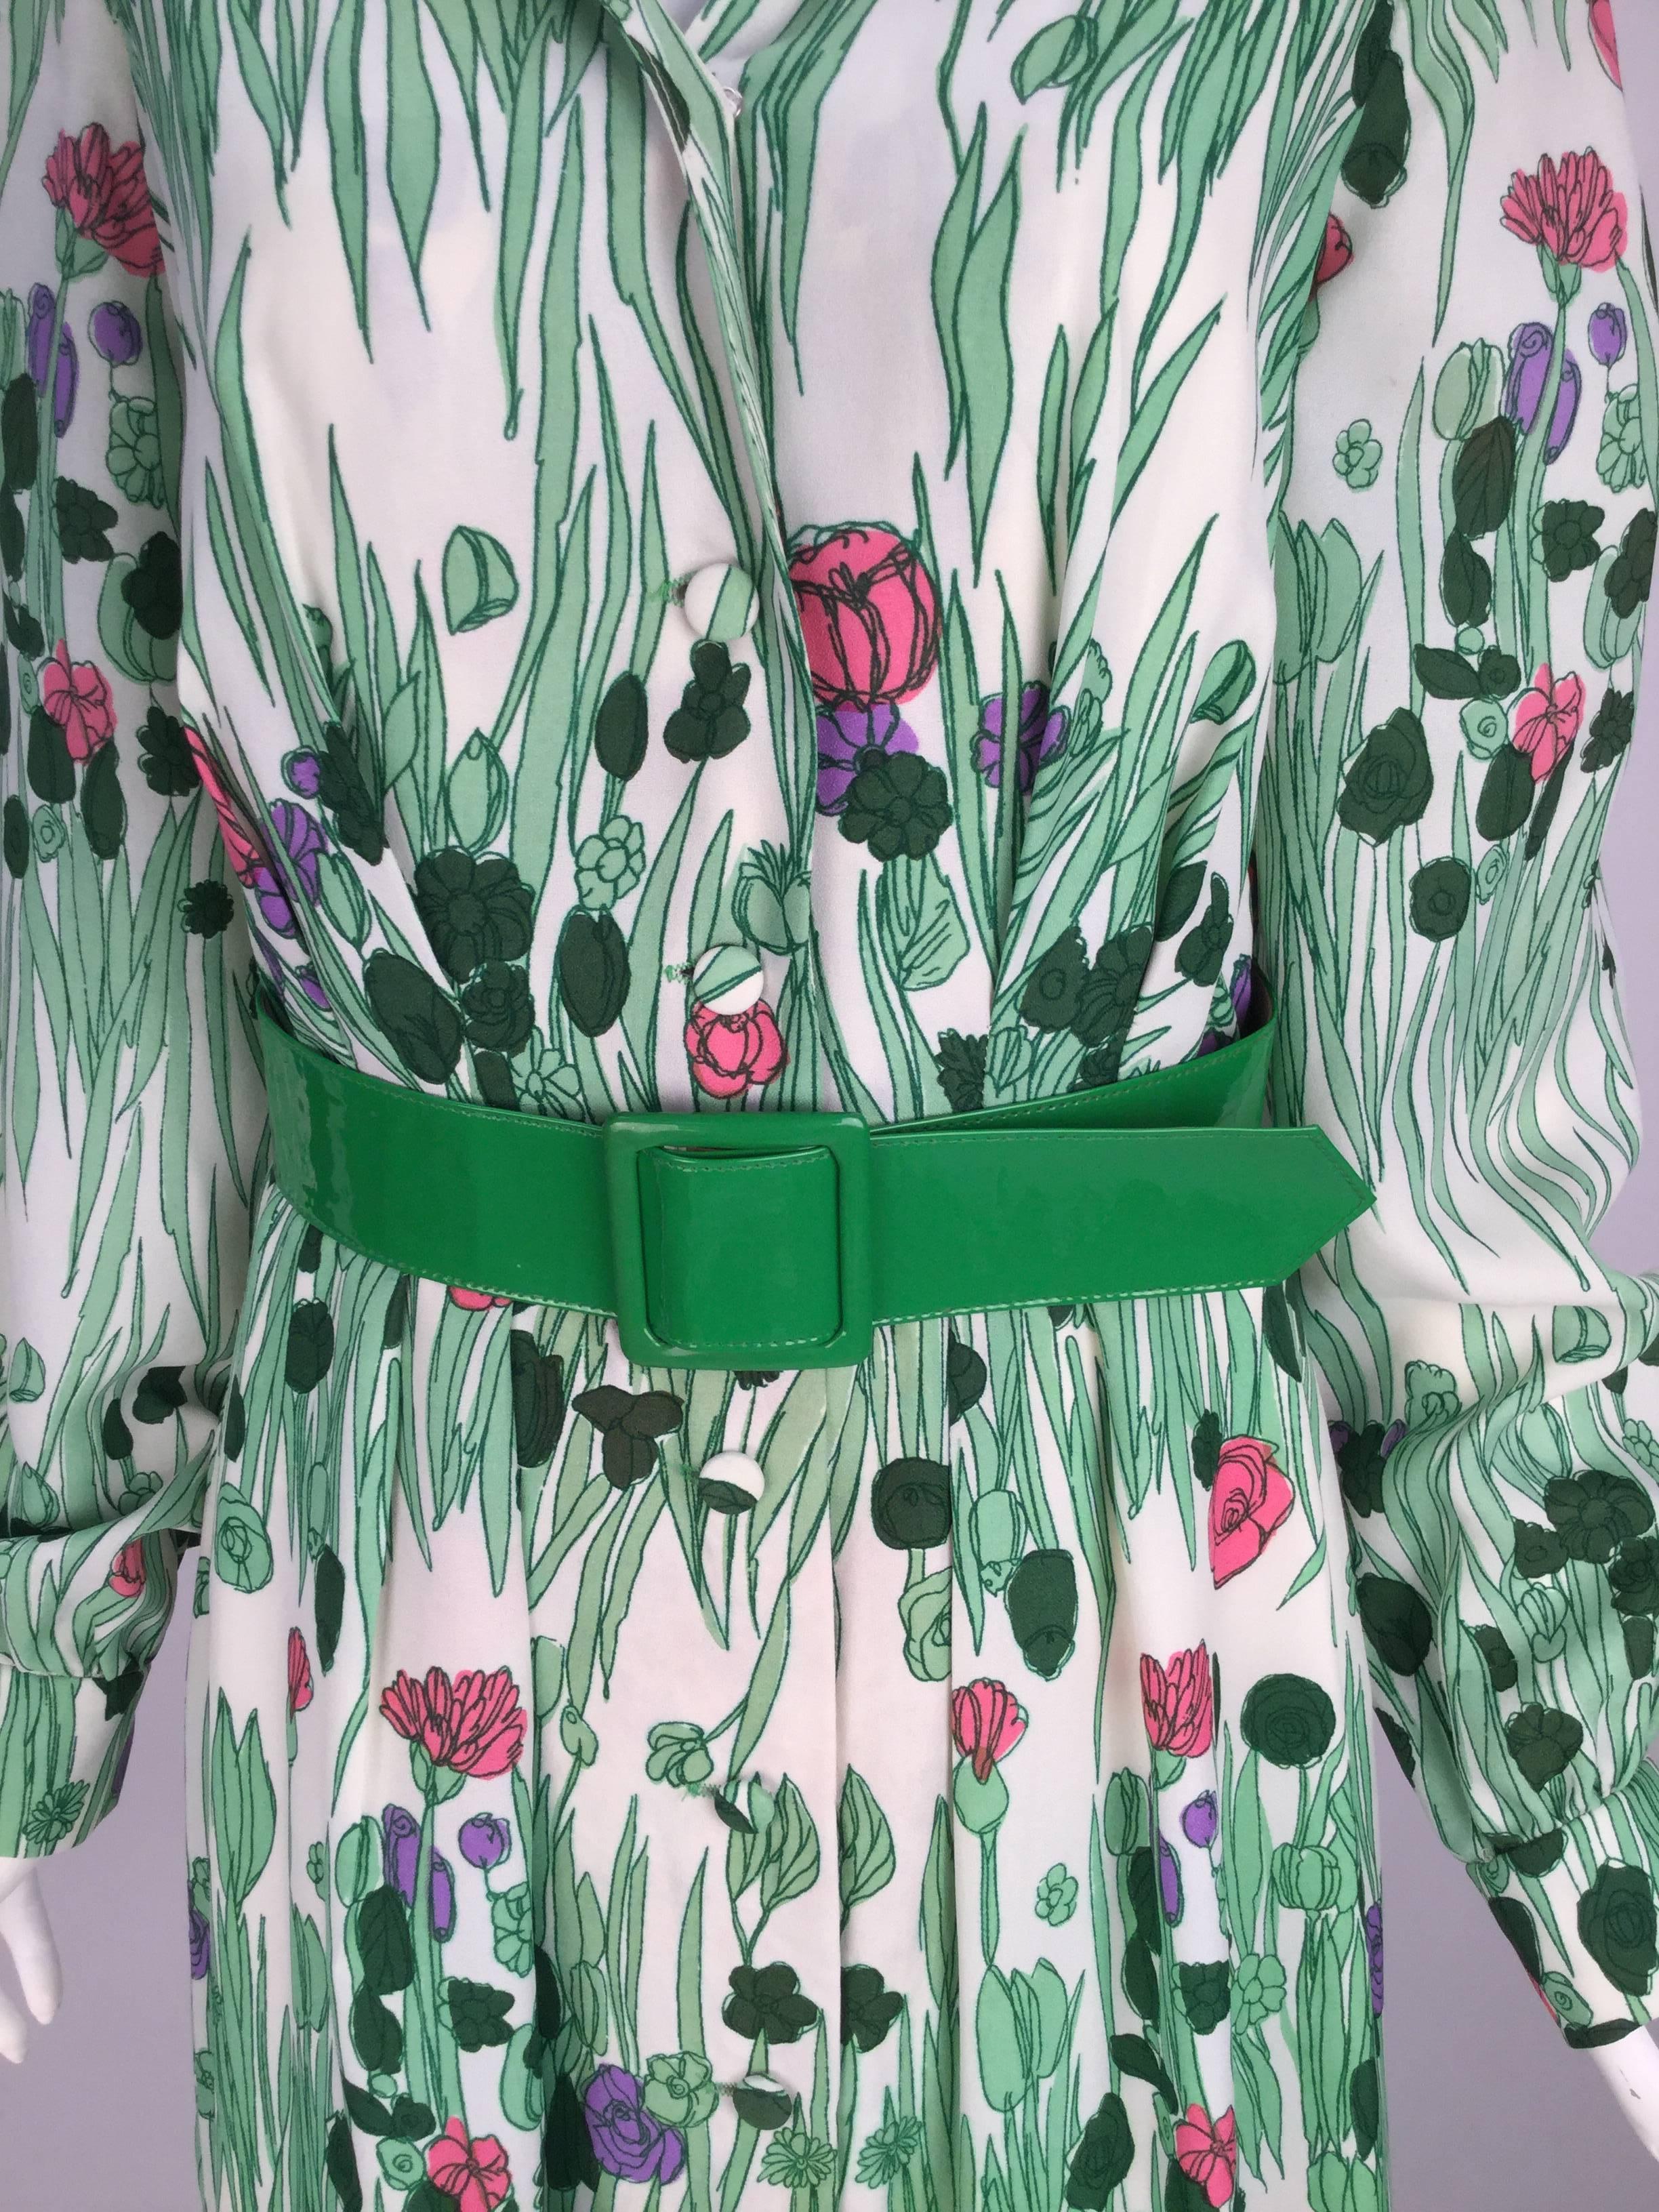 
Vintage 1970's Estevez maxi dress under his Eva Gabor look line.  
Dress has an amazing green grass print with flowers. 
Over sized collar with button down front. Sleeves have one button on each cuff. Matching green vinyl belt. 
Gathered skirt.